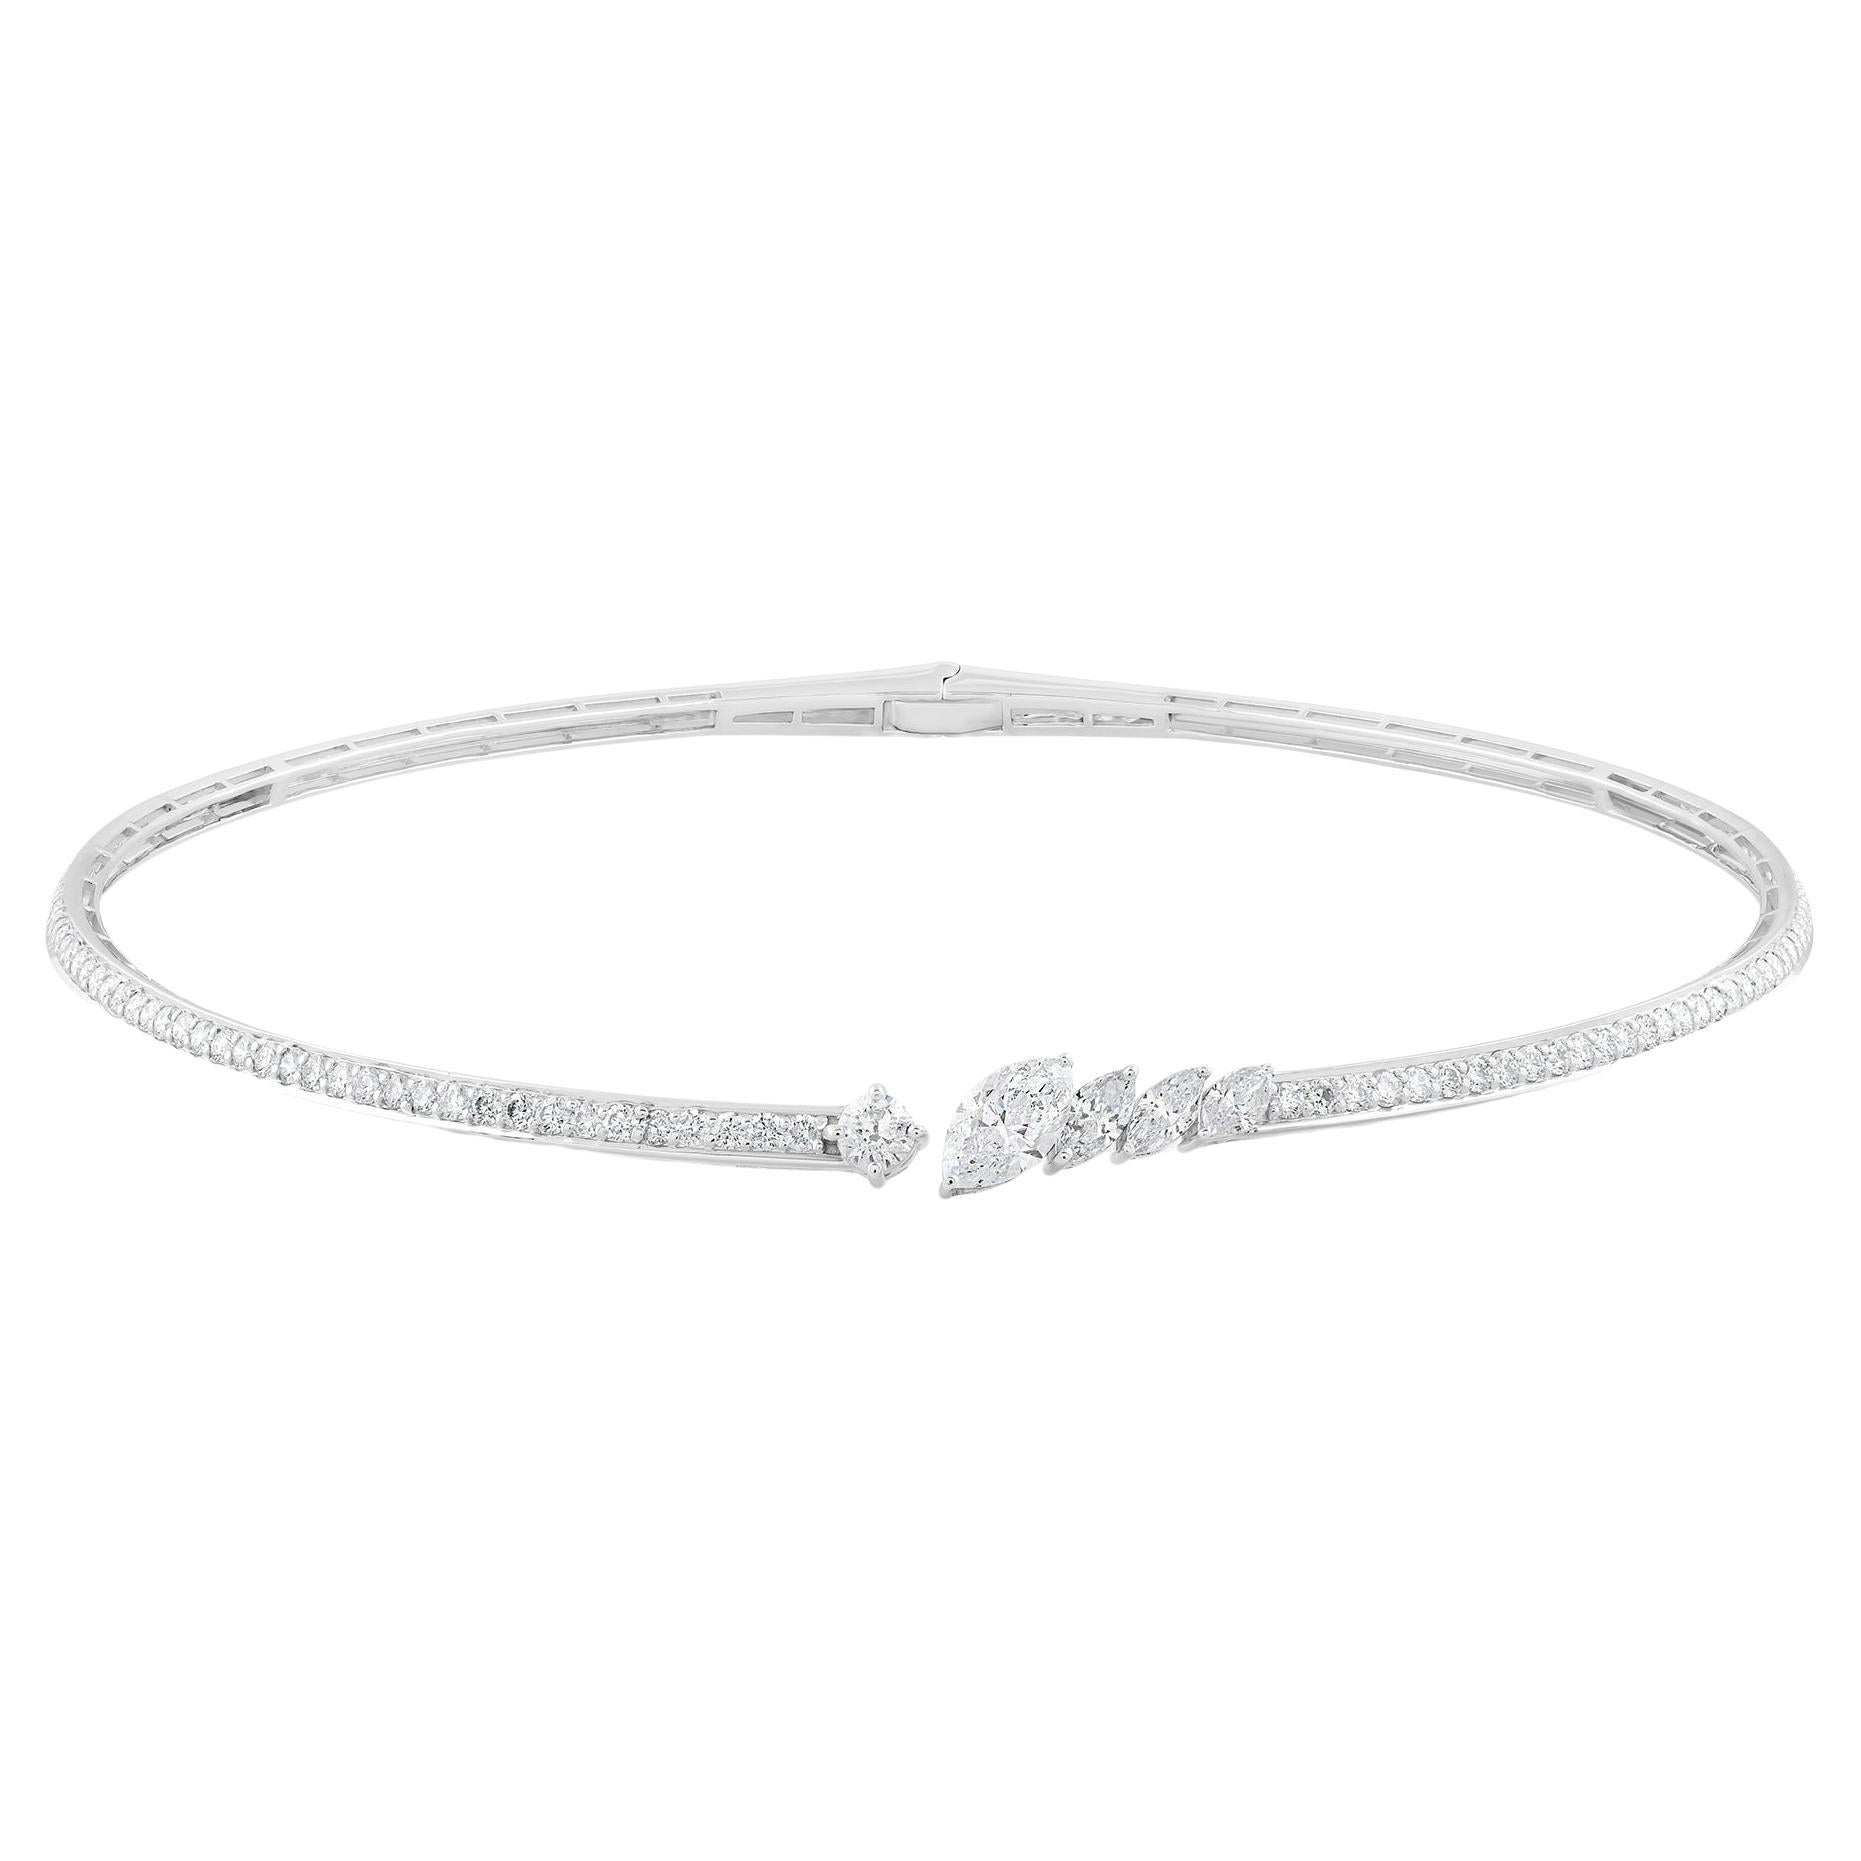 Natural 4.90 Carat Marquise Diamond Choker Necklace 18 Karat White Gold Jewelry For Sale